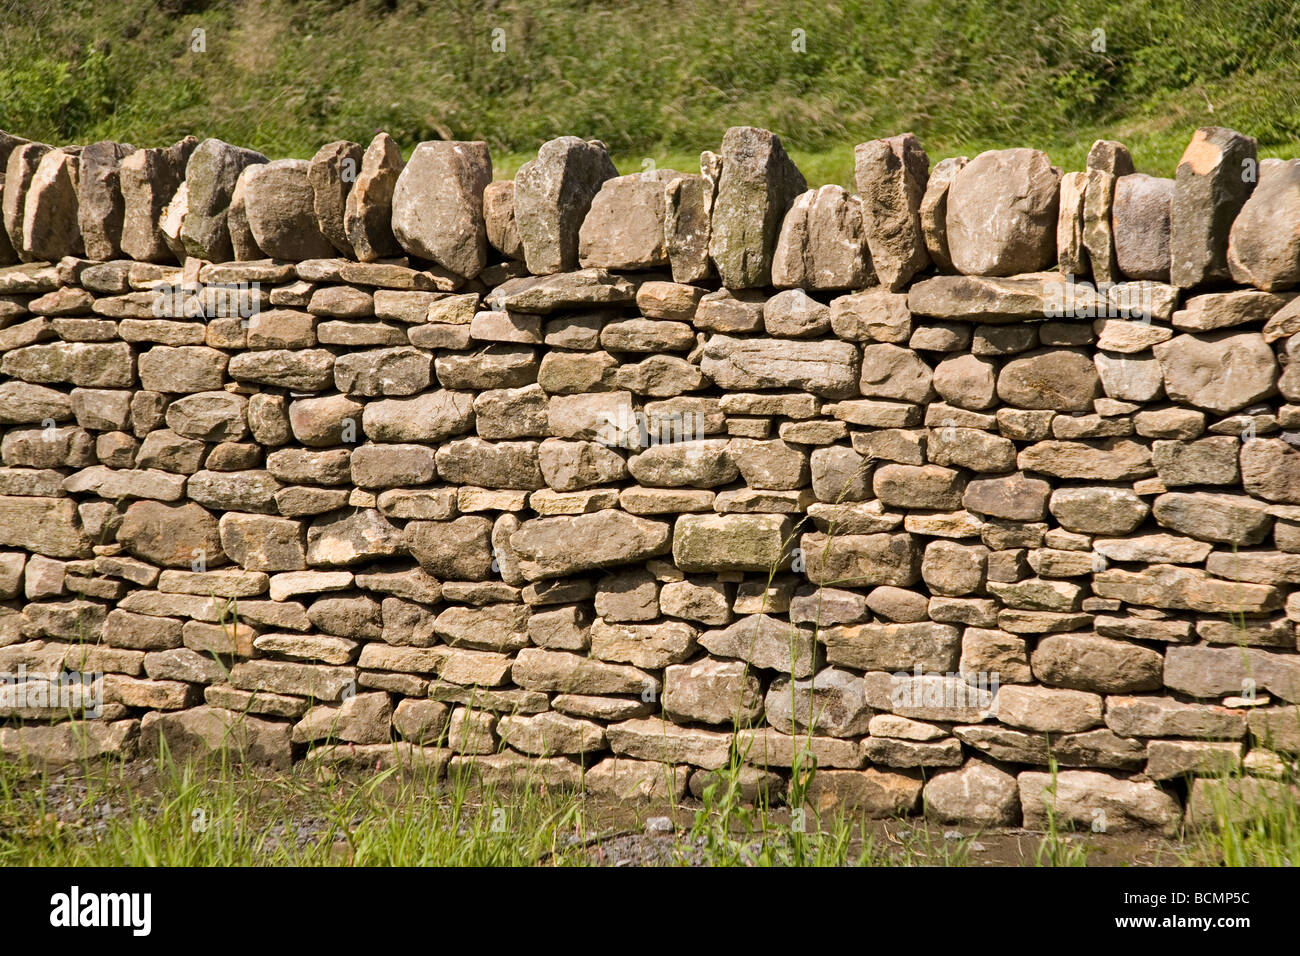 A dry stone wall in Teesdale, northern England. Dry stone walls are an environmentally friendly means of marking pastoral land. Stock Photo